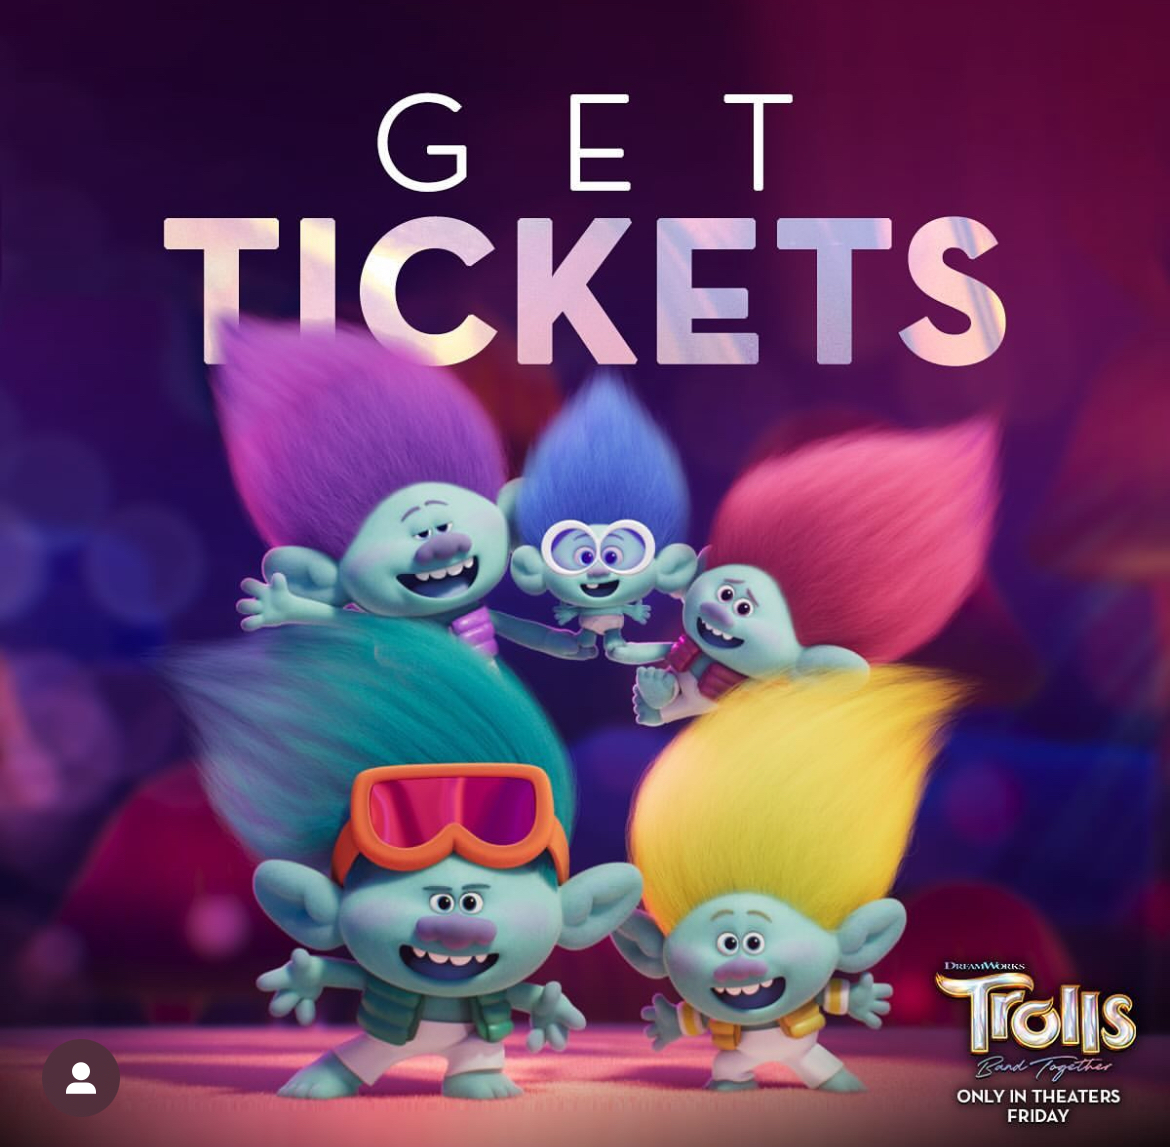 The official Trolls Instagram advertising the movie with the fun characters before it came out. (Credit: @trolls on Instagram)